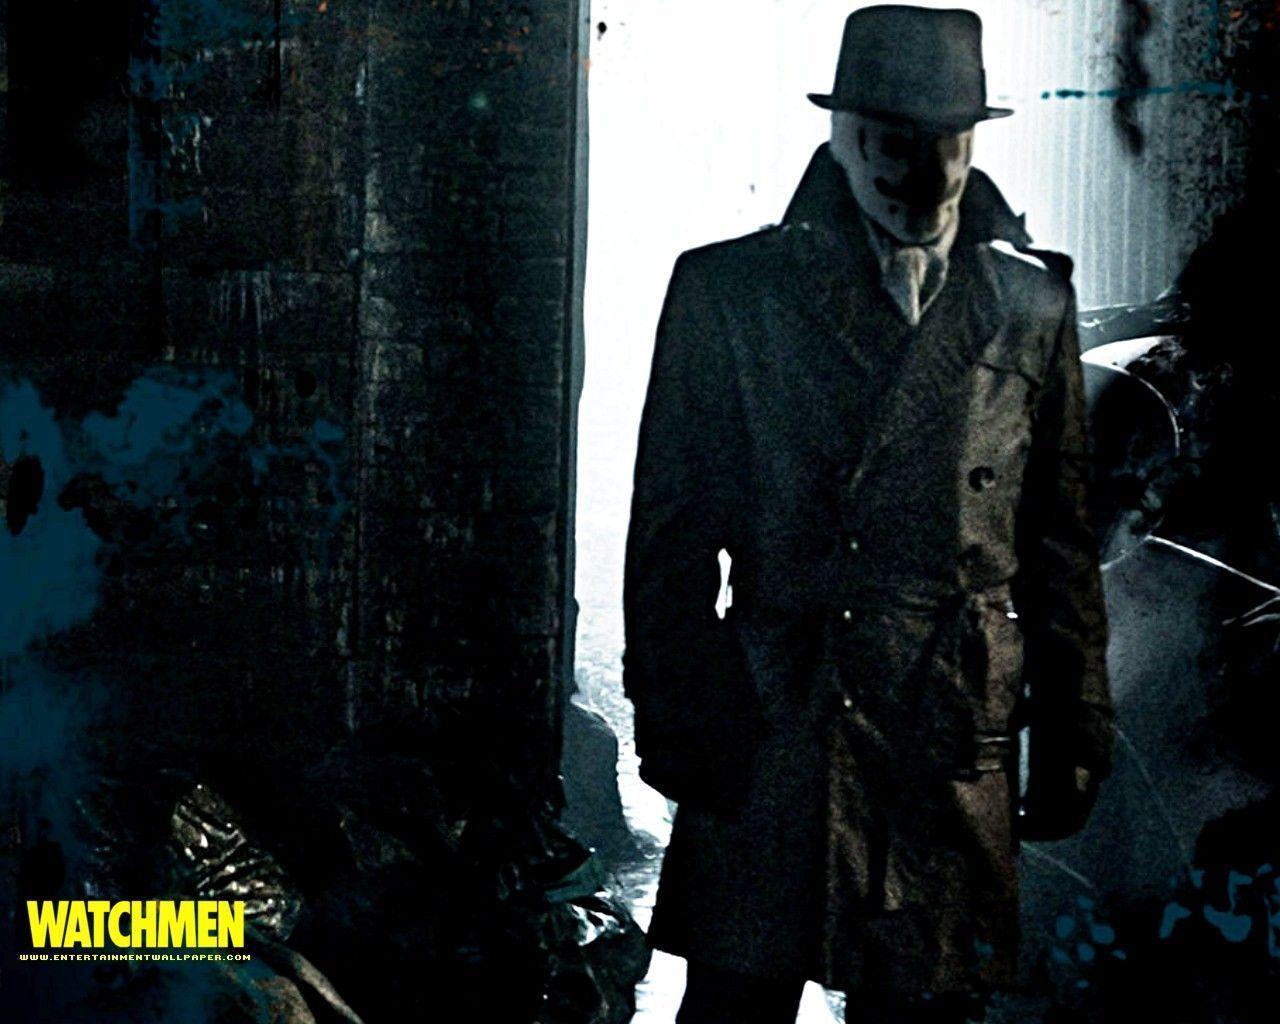 Watchmen Movie Characters Wallpaper. Fashion Trends 2014